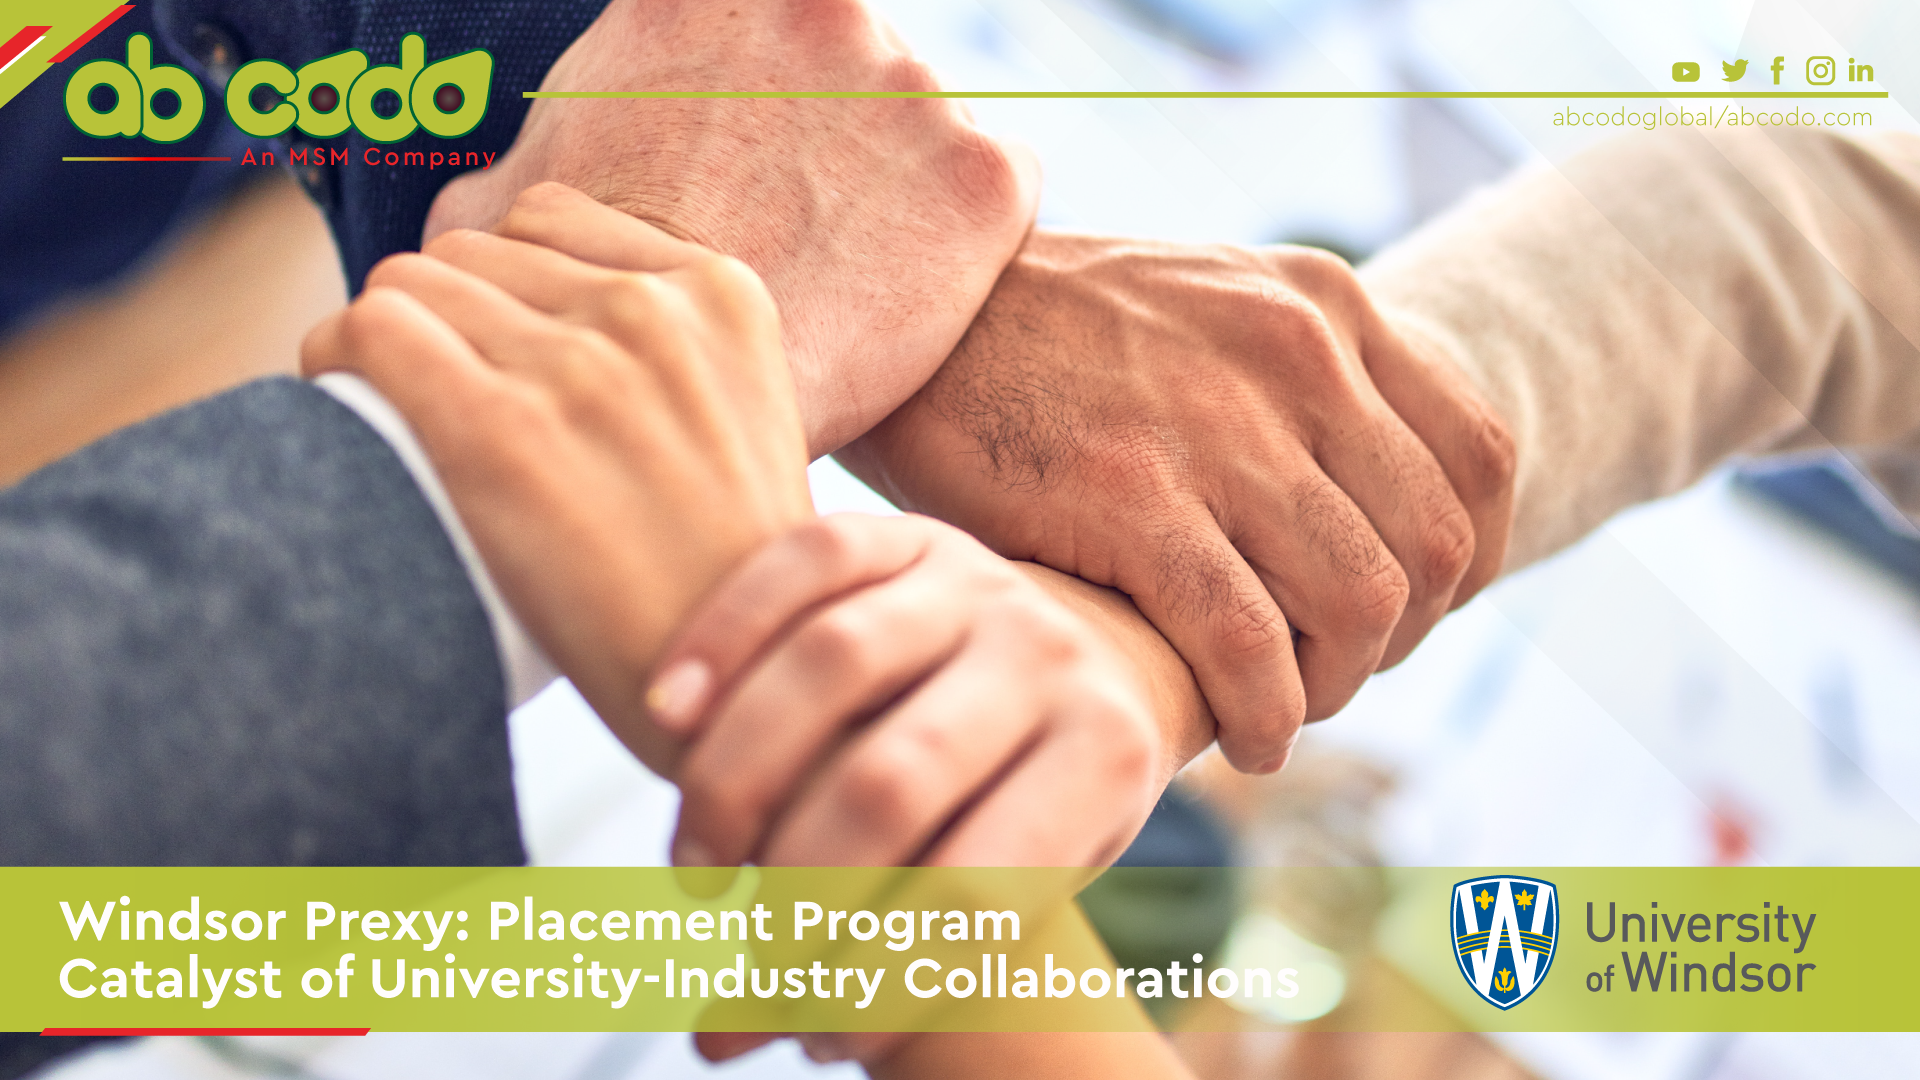 Windsor Prexy: Placement Program Catalyst of University-Industry Collaborations